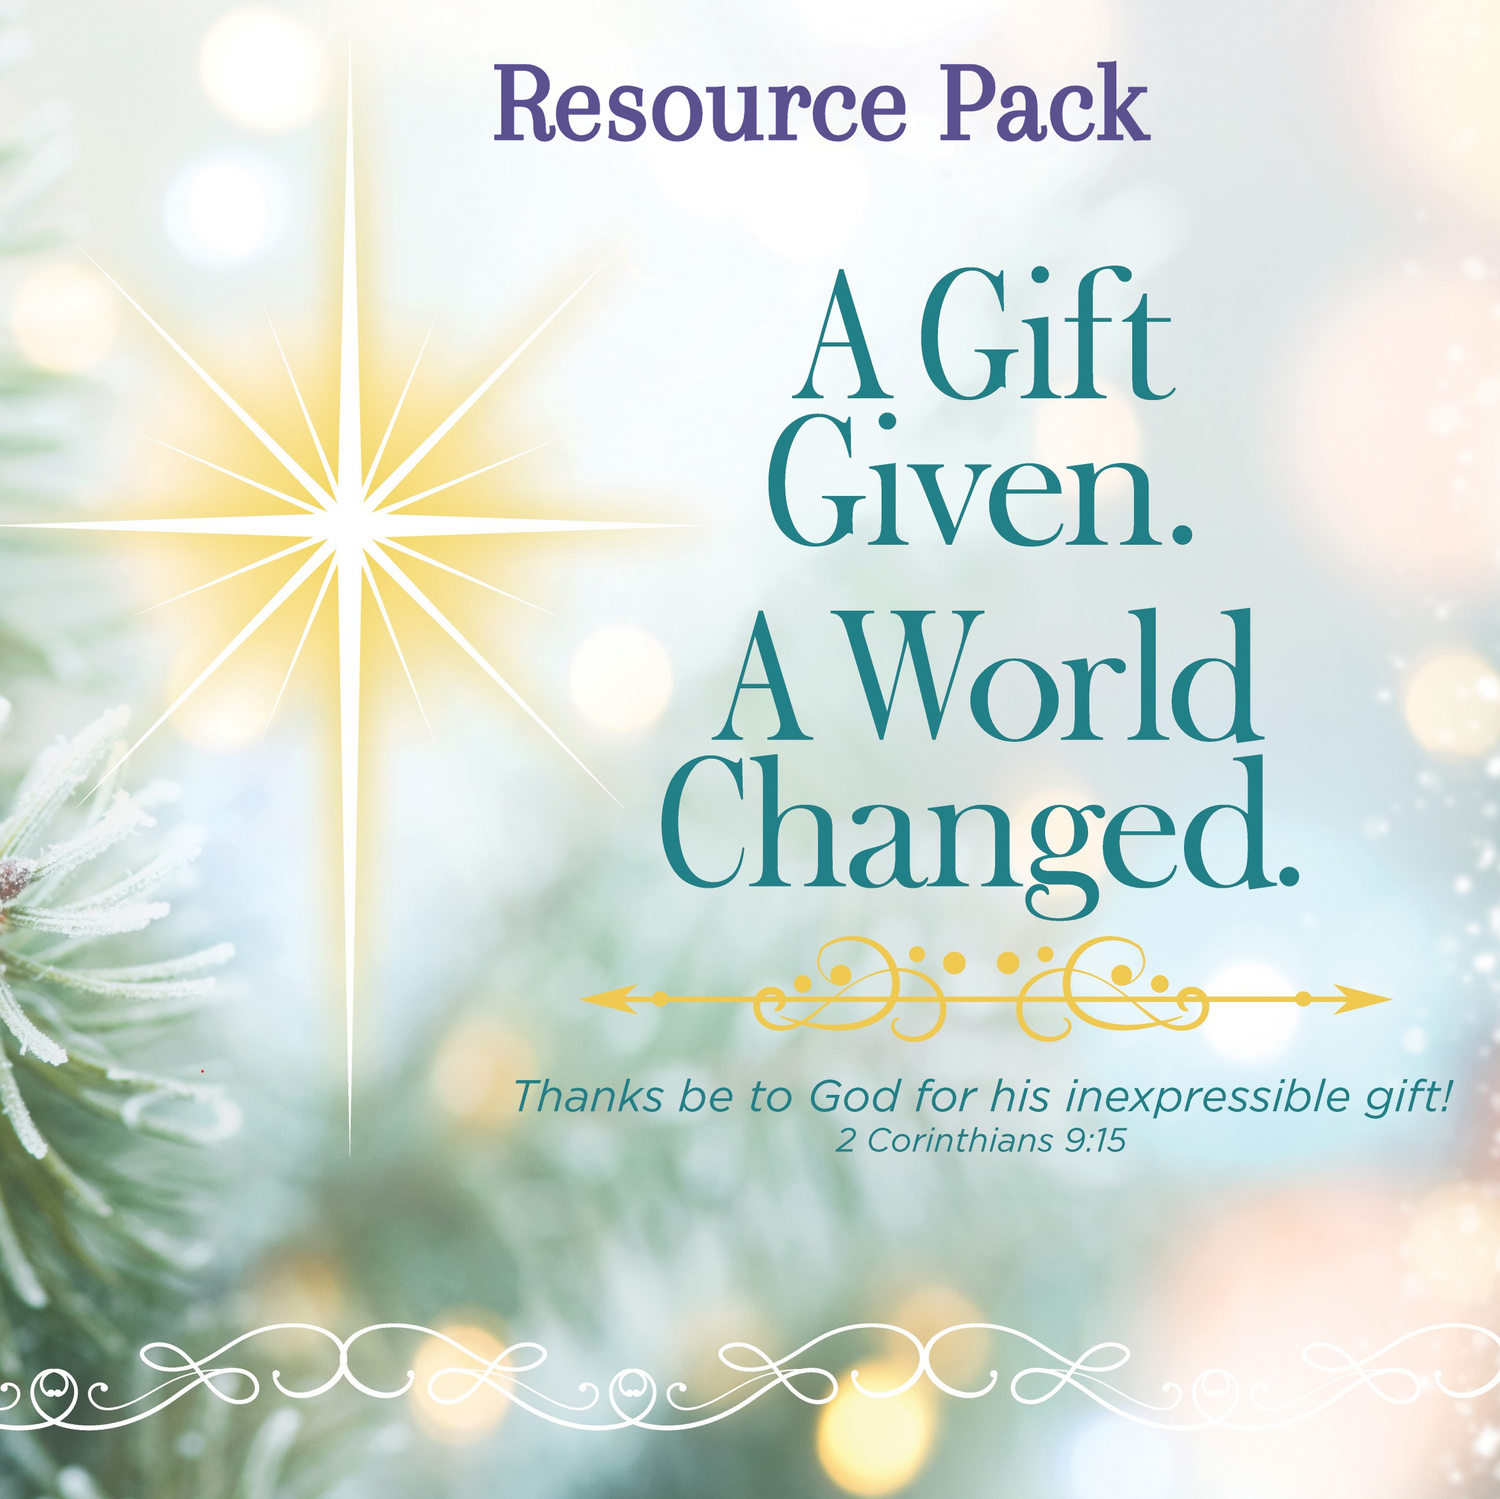 Resource Pack - A Gift Given. A World Changed